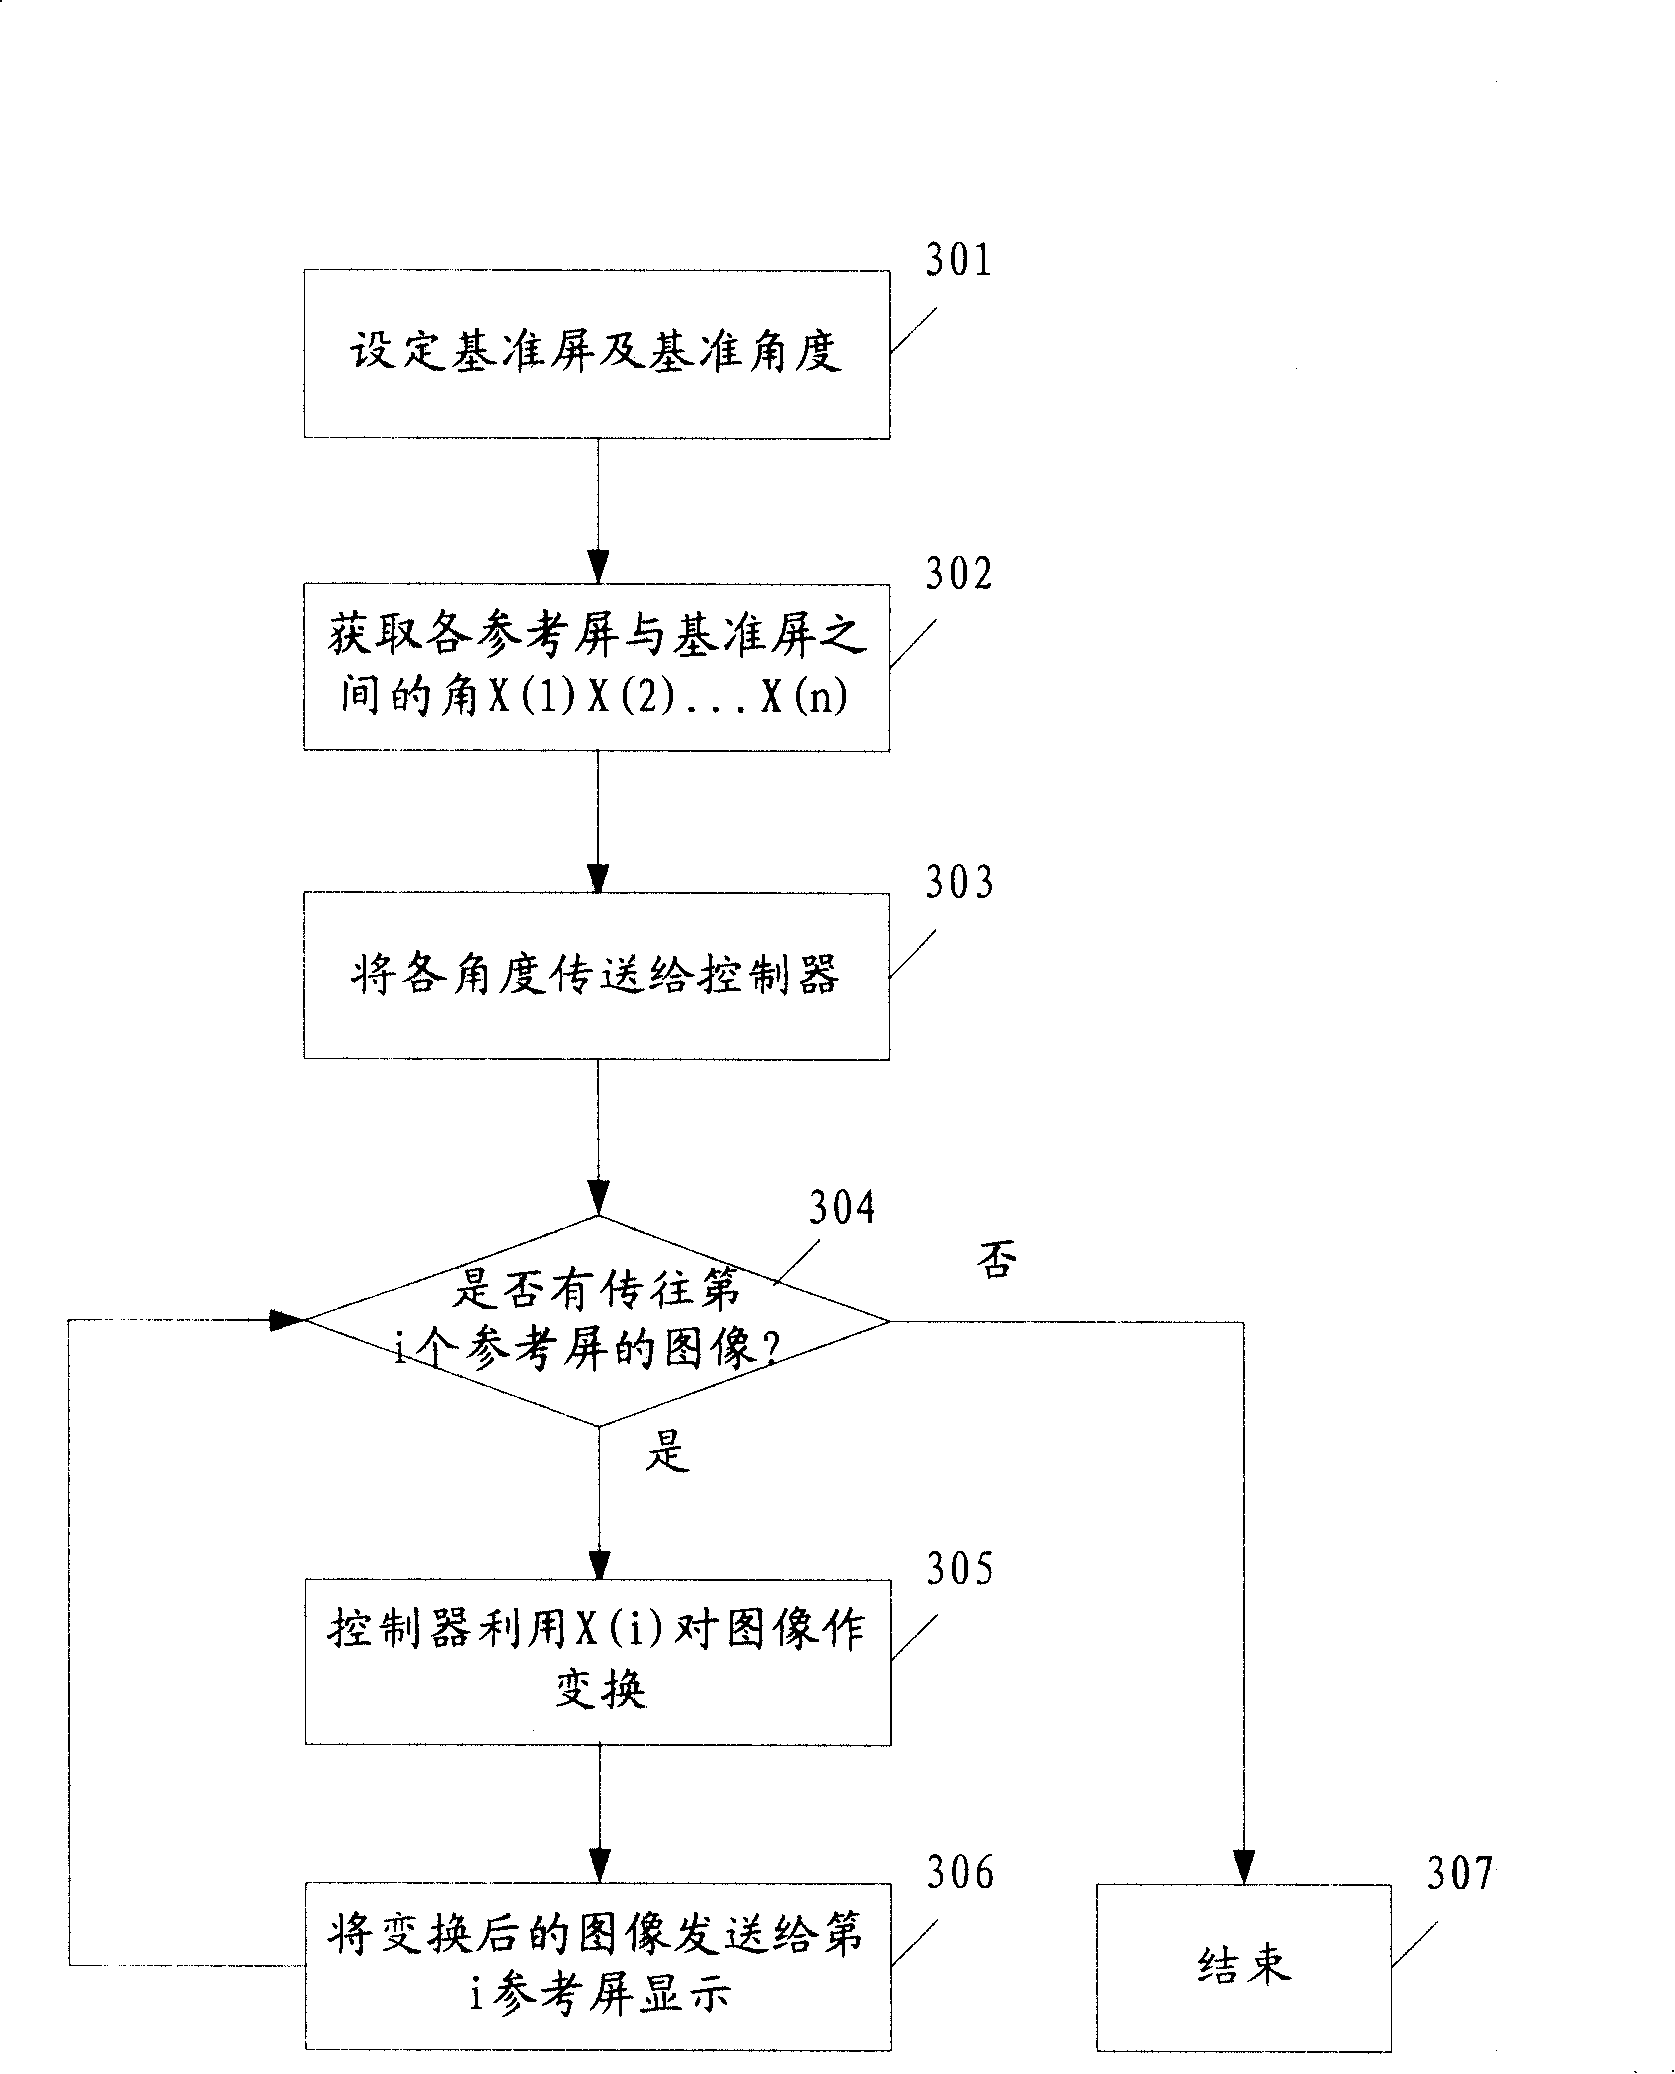 Multi-screen display process and system